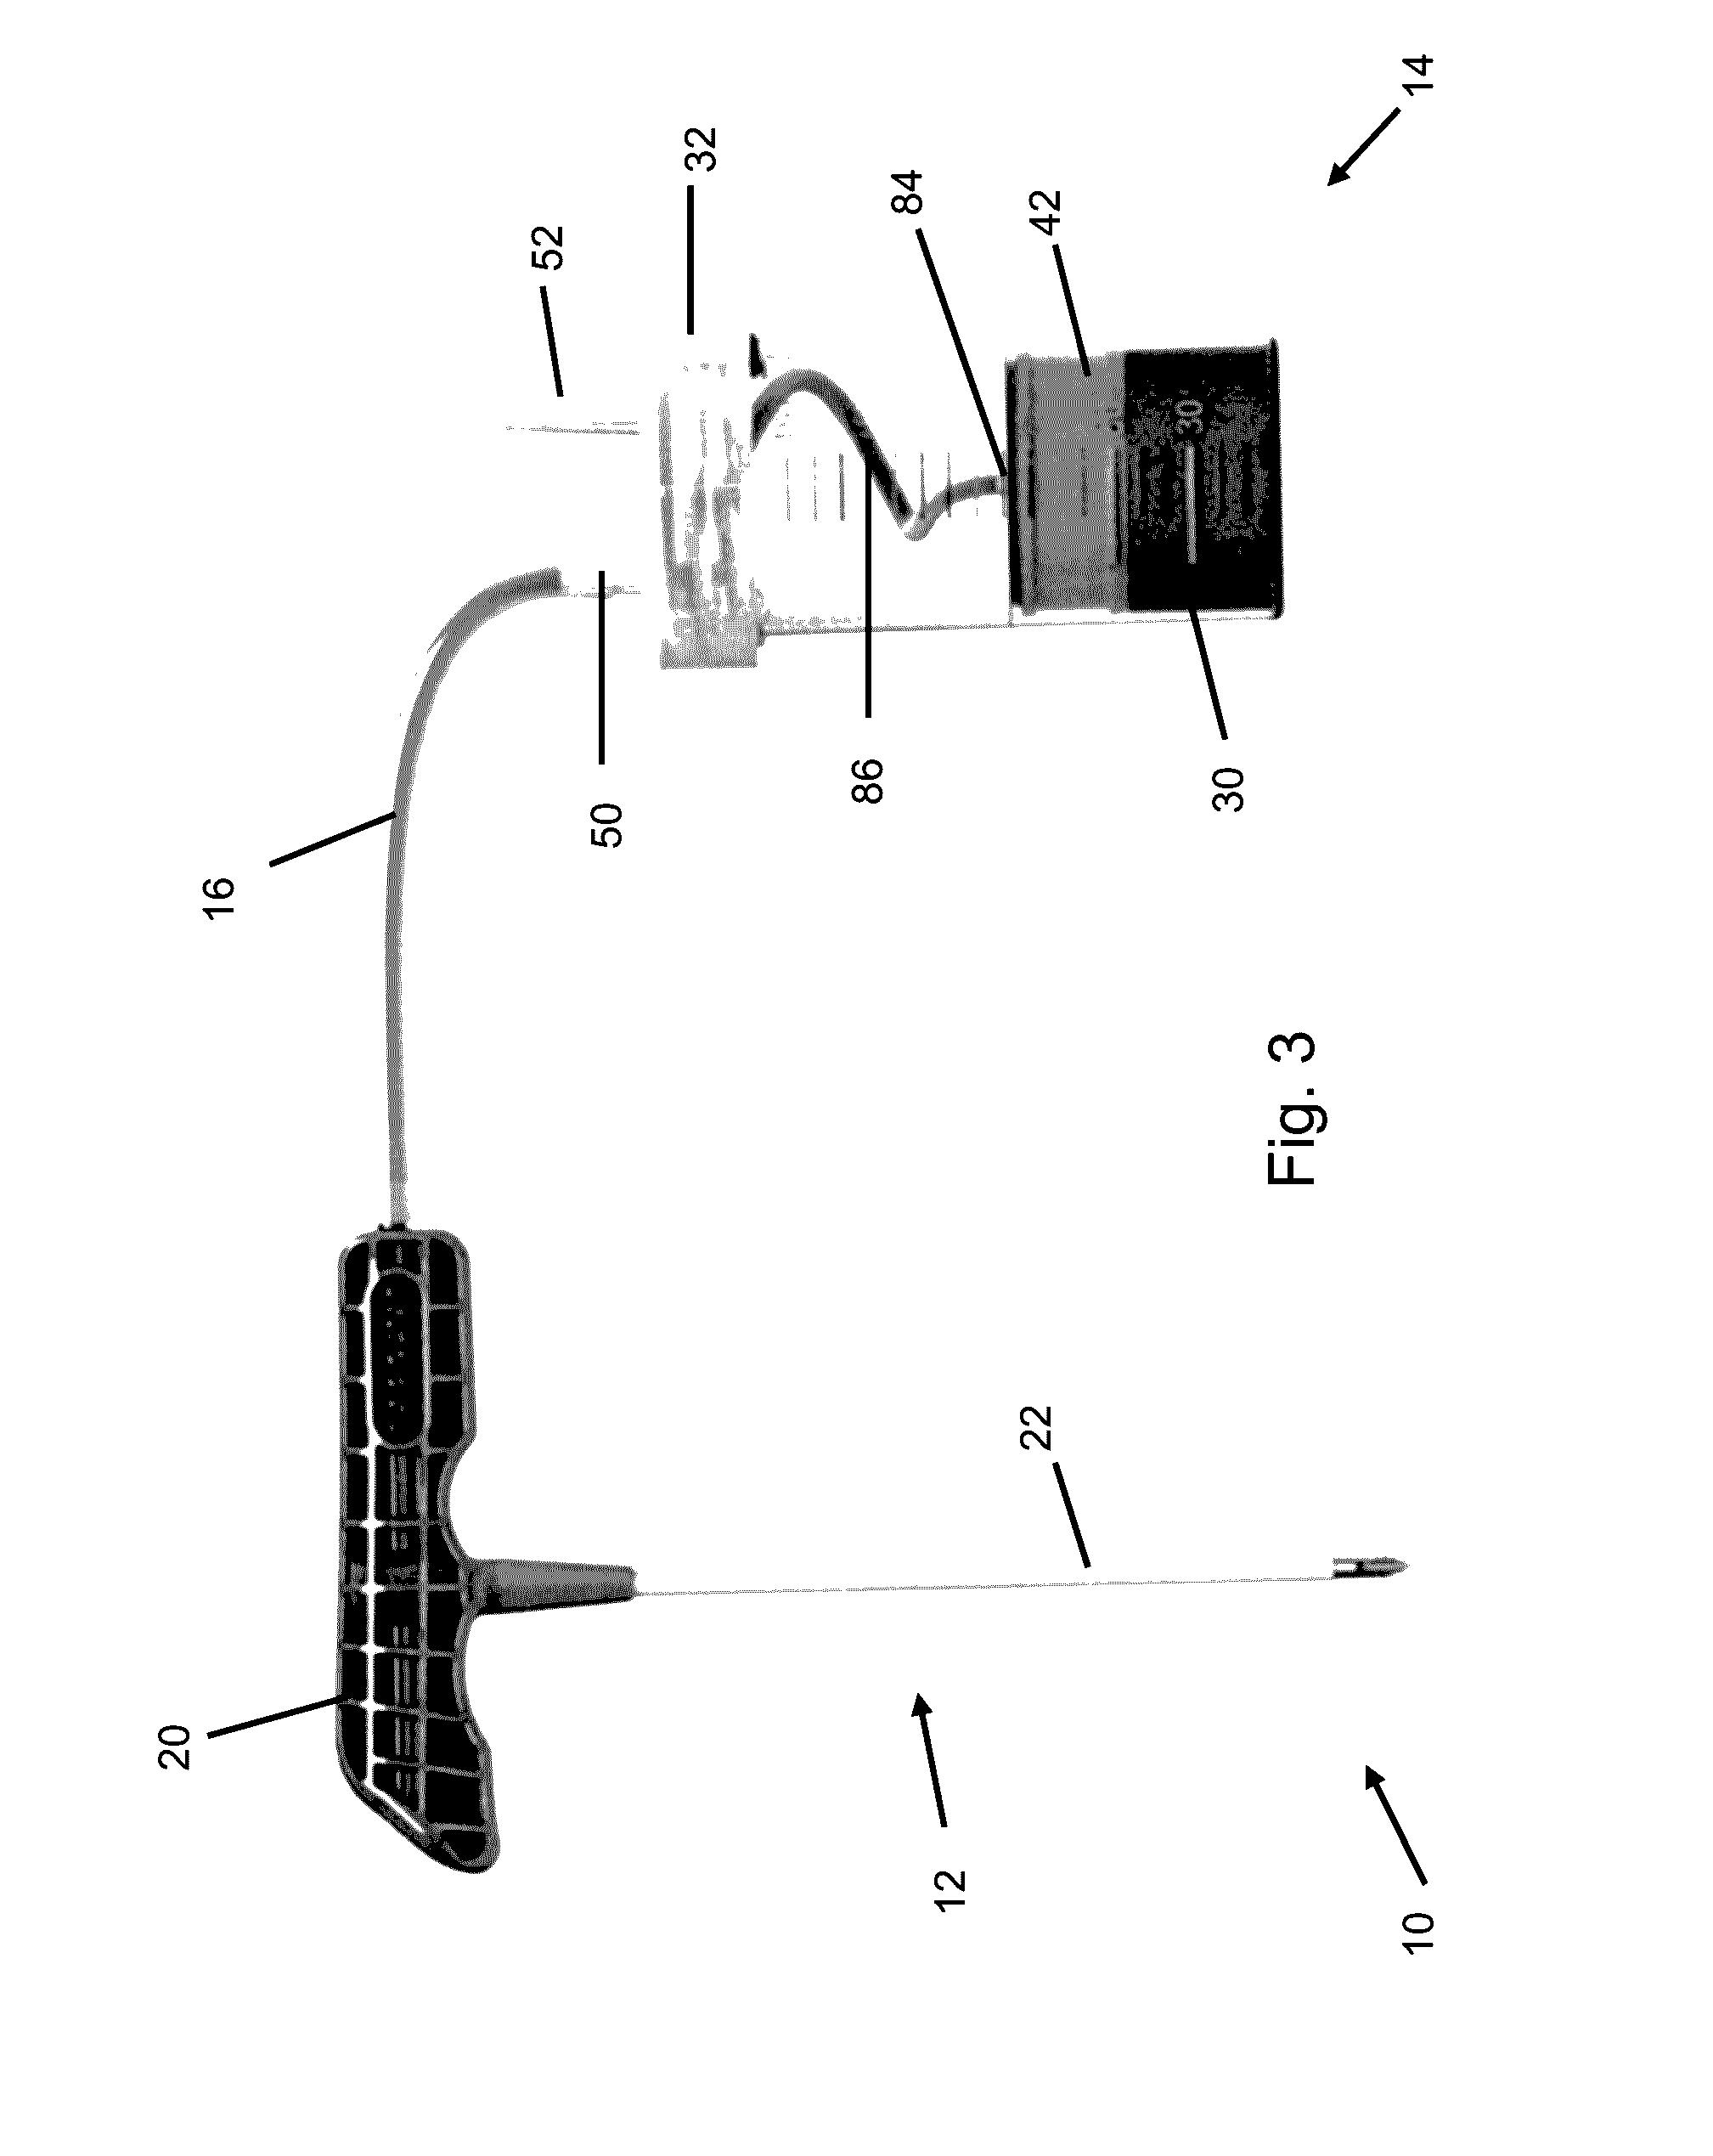 Bone fragment and tissue processing system